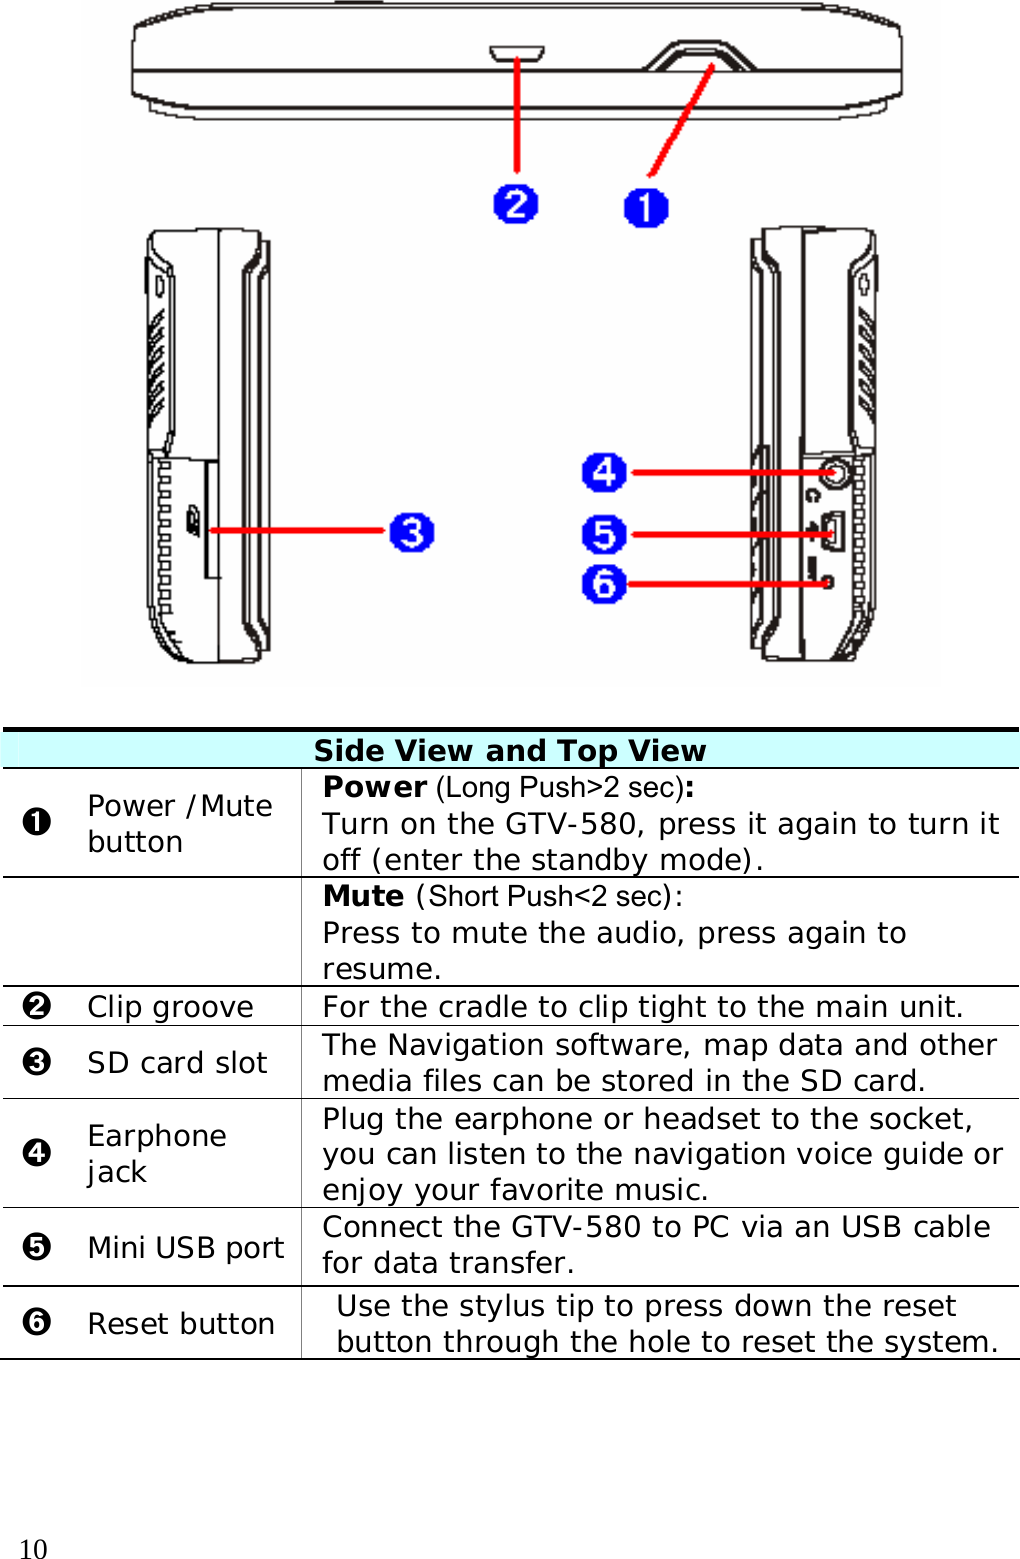  10   Side View and Top View ➊ Power /Mute button Power (Long Push&gt;2 sec):  Turn on the GTV-580, press it again to turn it off (enter the standby mode).    Mute (Short Push&lt;2 sec):  Press to mute the audio, press again to resume. ➋ Clip groove  For the cradle to clip tight to the main unit. ➌ SD card slot  The Navigation software, map data and other media files can be stored in the SD card. ➍ Earphone jack Plug the earphone or headset to the socket, you can listen to the navigation voice guide or enjoy your favorite music. ➎ Mini USB port  Connect the GTV-580 to PC via an USB cable for data transfer. ➏ Reset button  Use the stylus tip to press down the reset button through the hole to reset the system.  